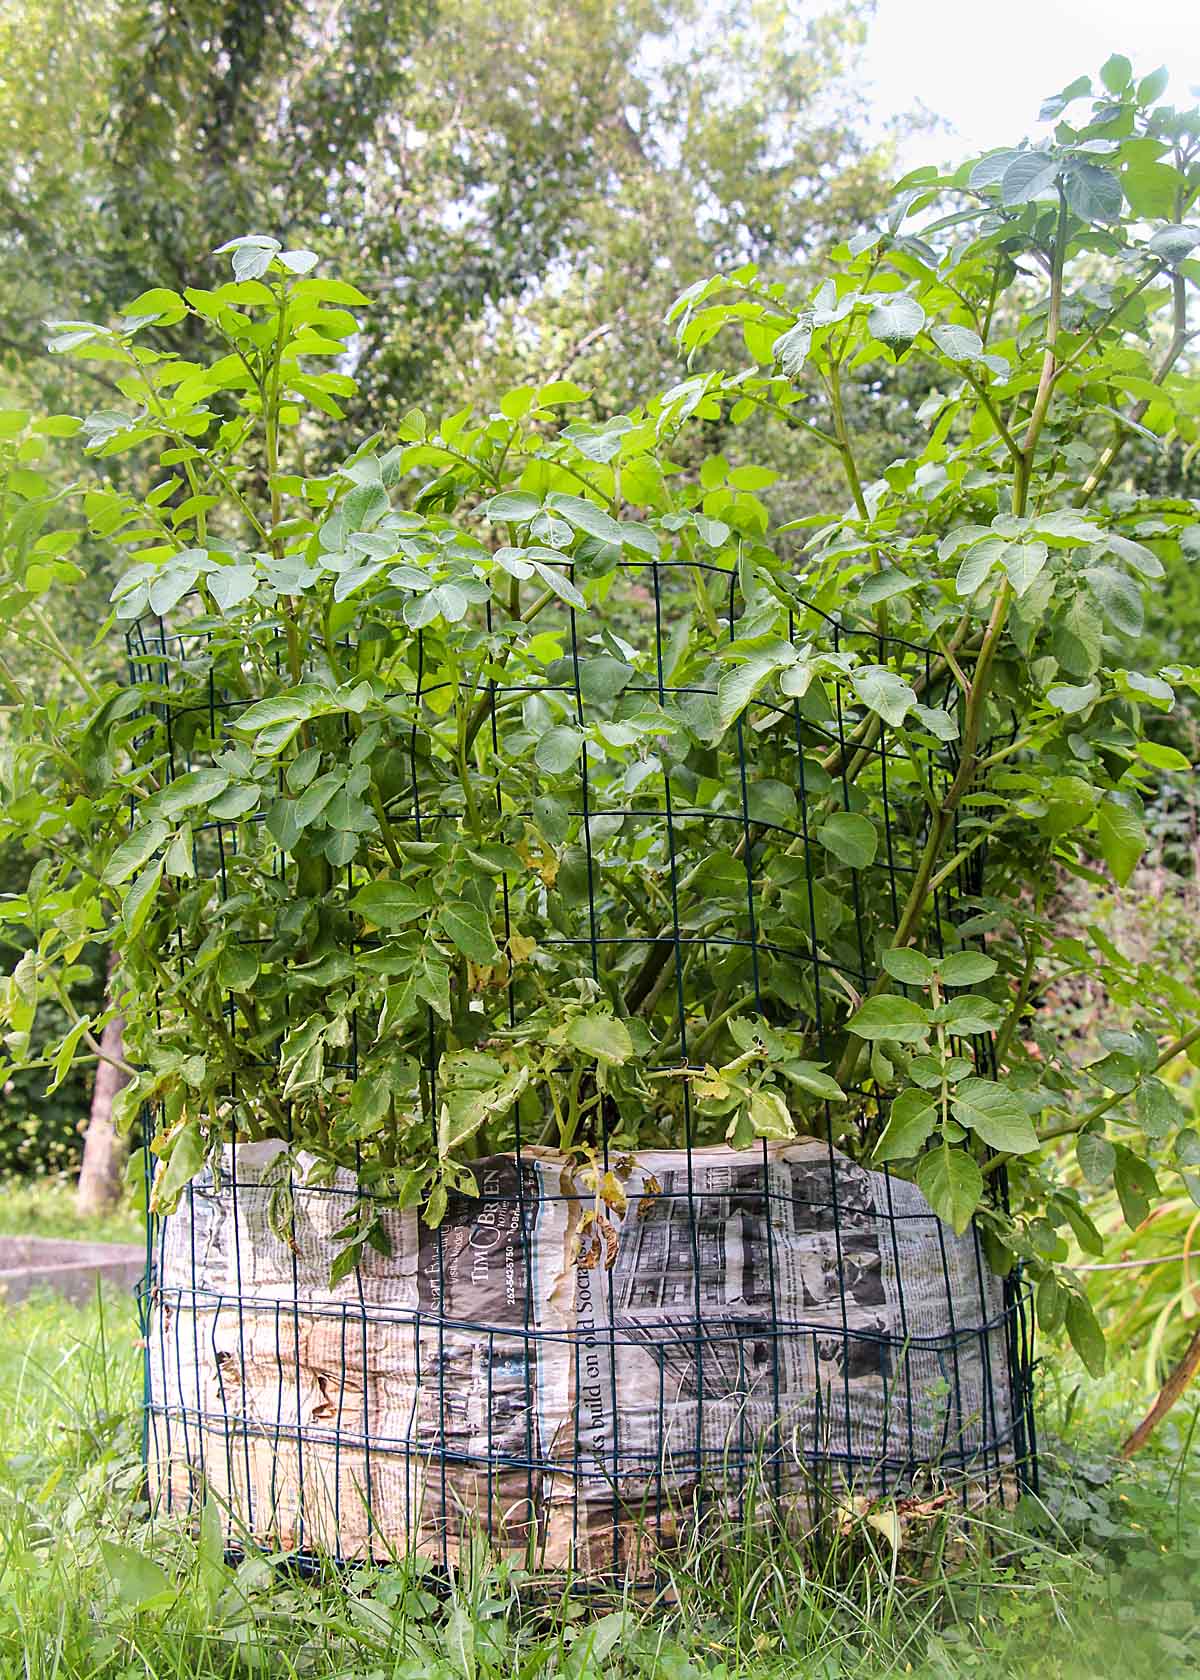 Growing potatoes in cages